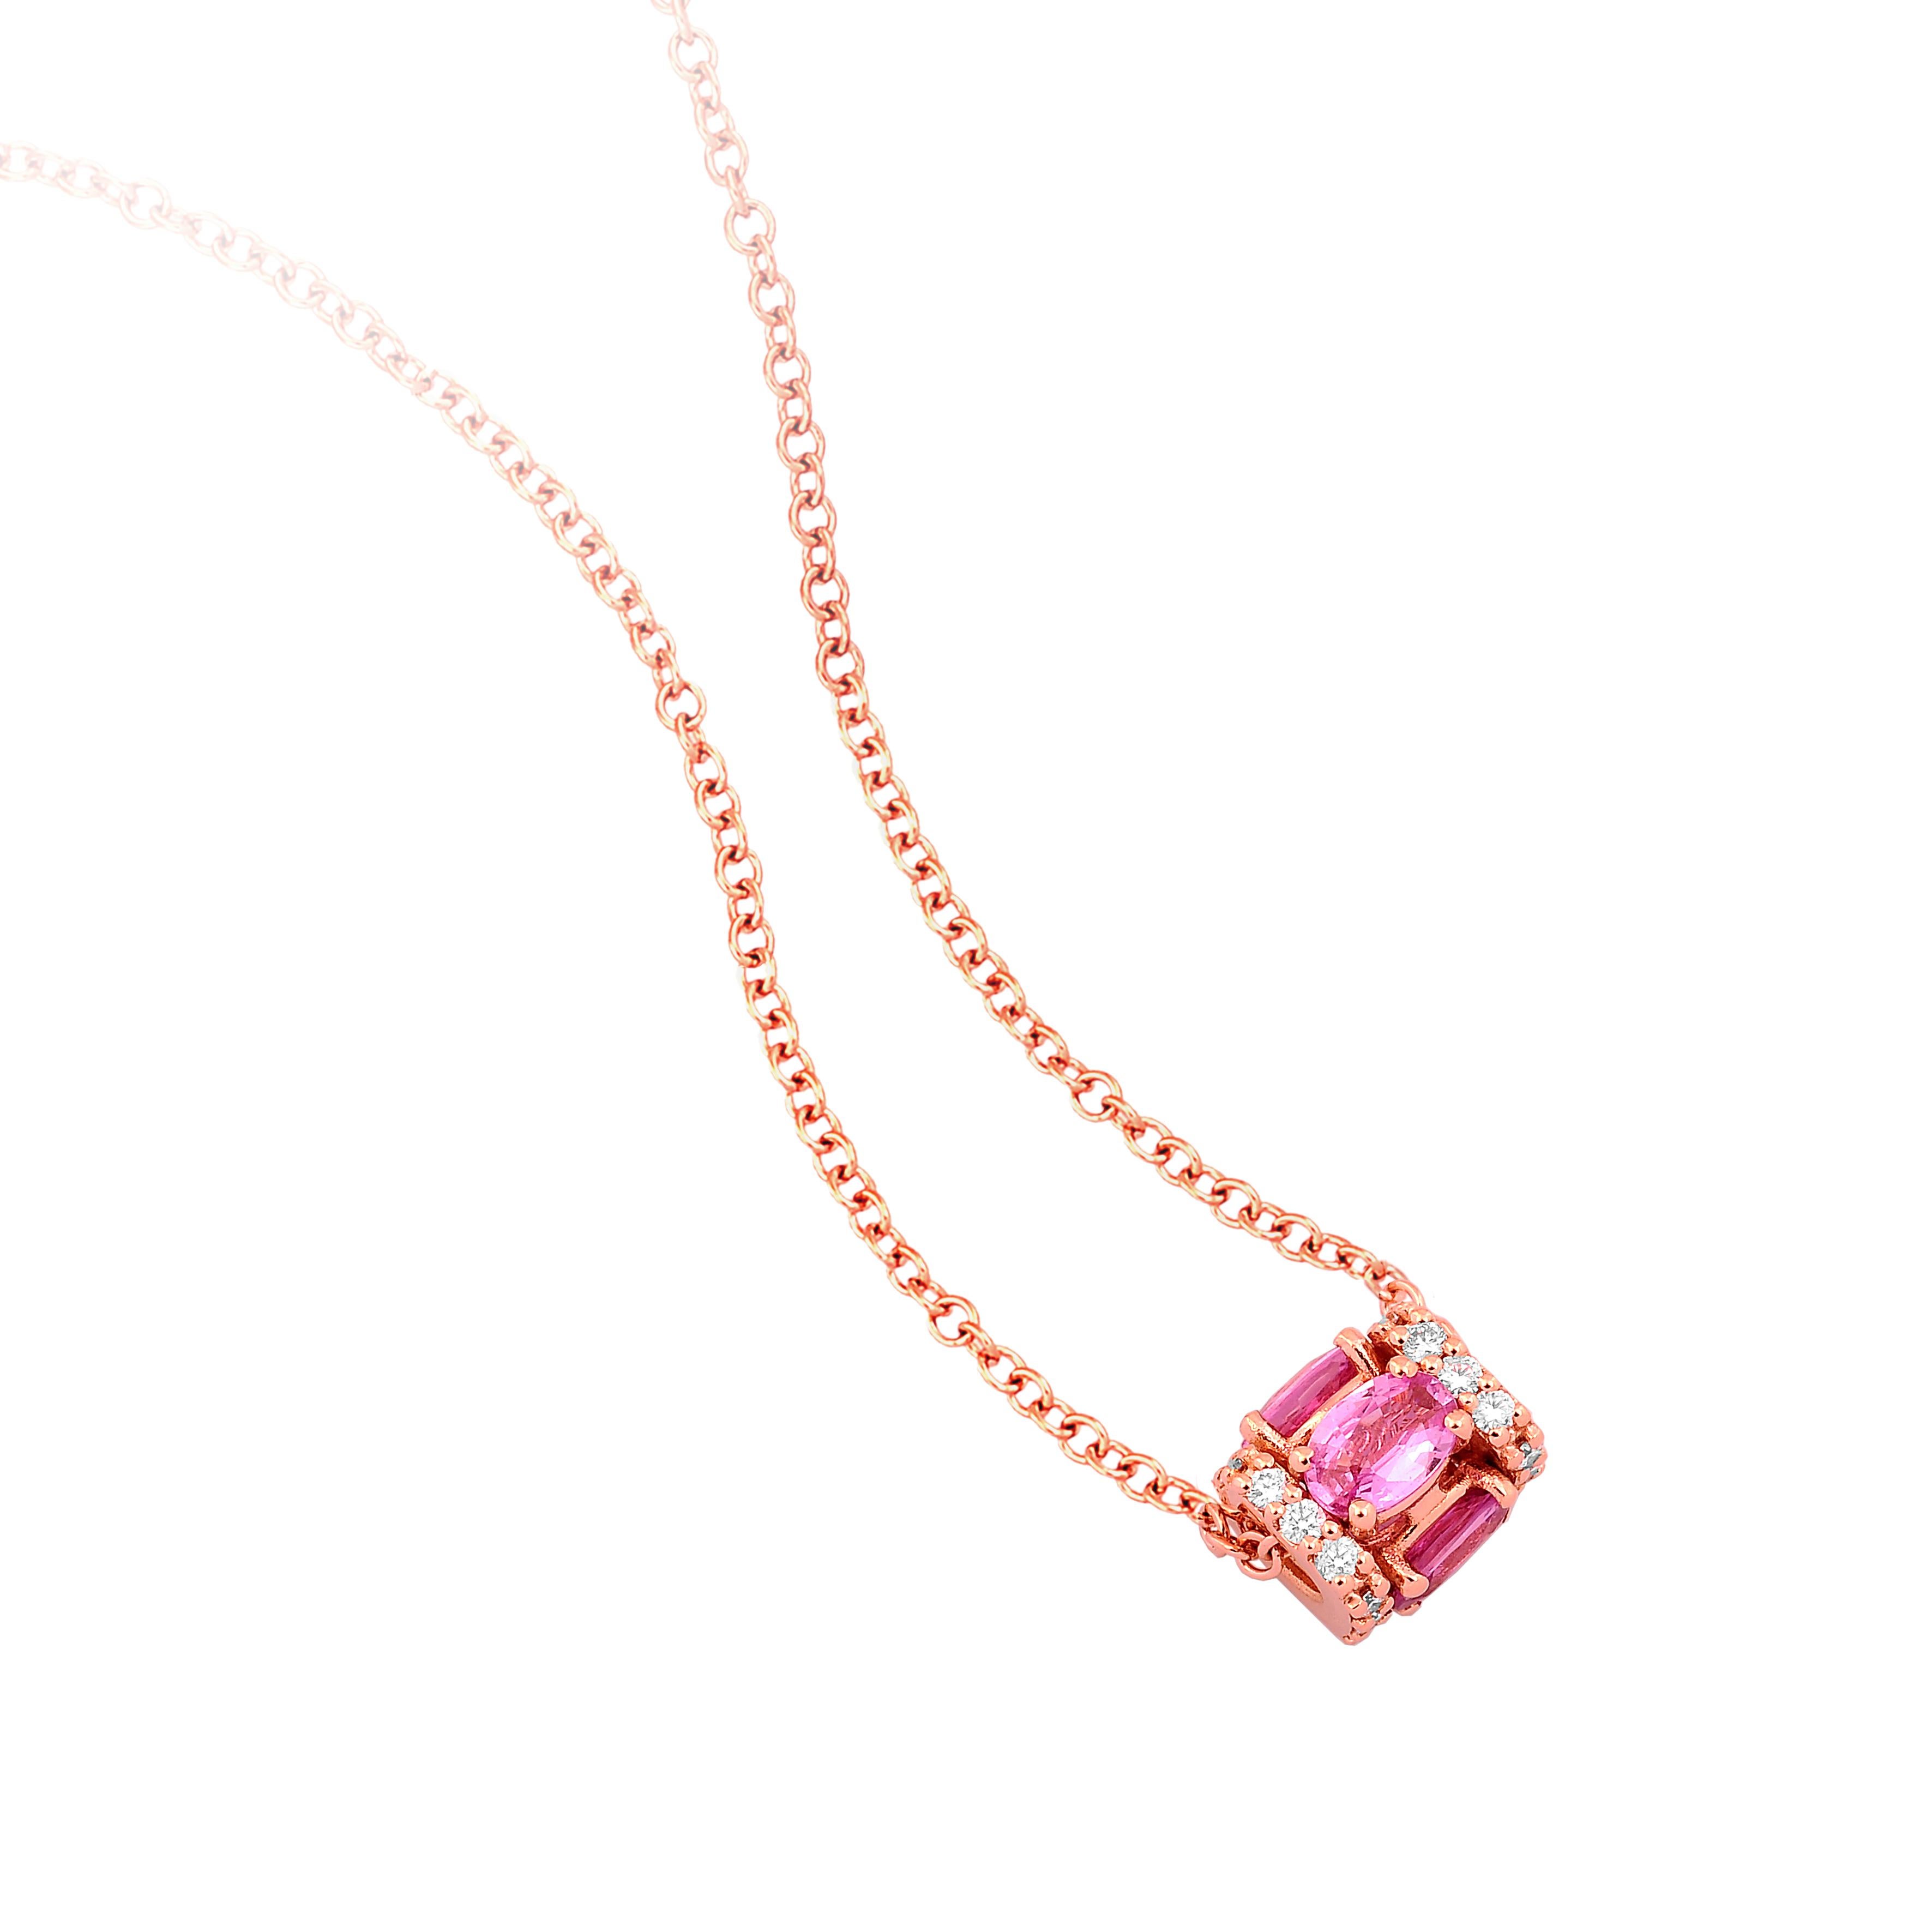 18K rose gold, white diamond (approx. 0.40 carats), and pink sapphire (approx. 1.83 carats) pendant necklace